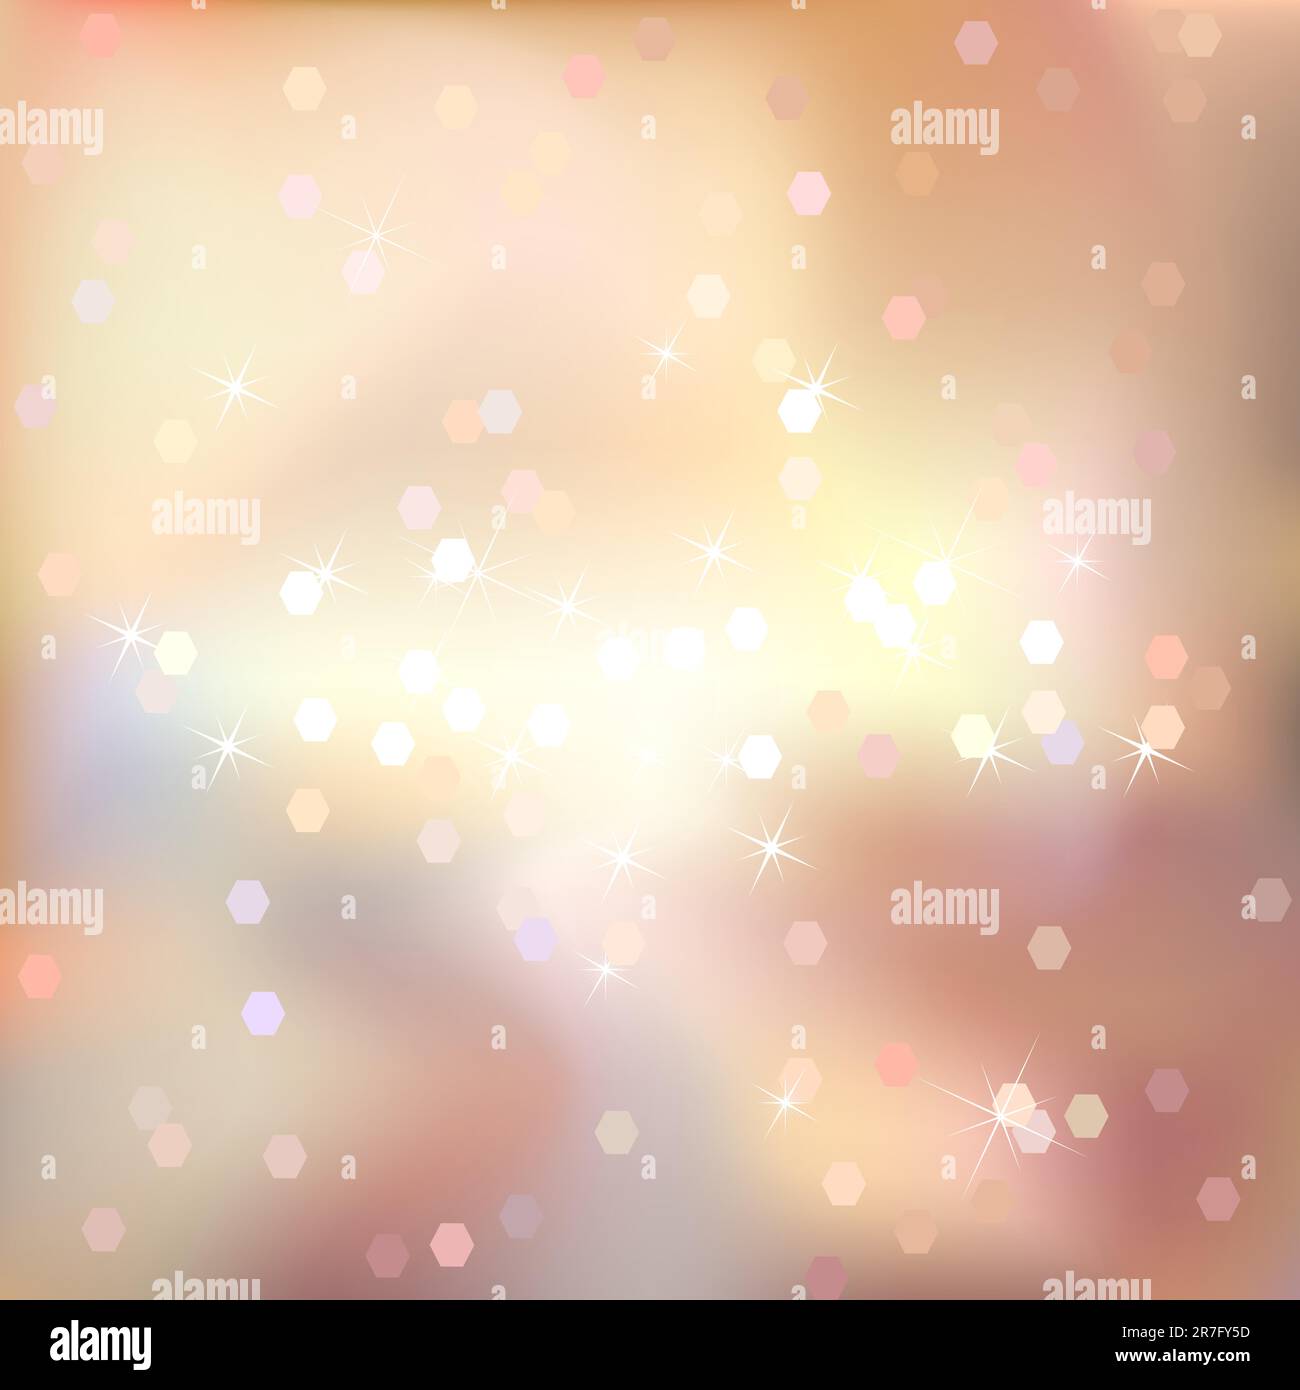 Abstract light brilliant vector background Stock Vector